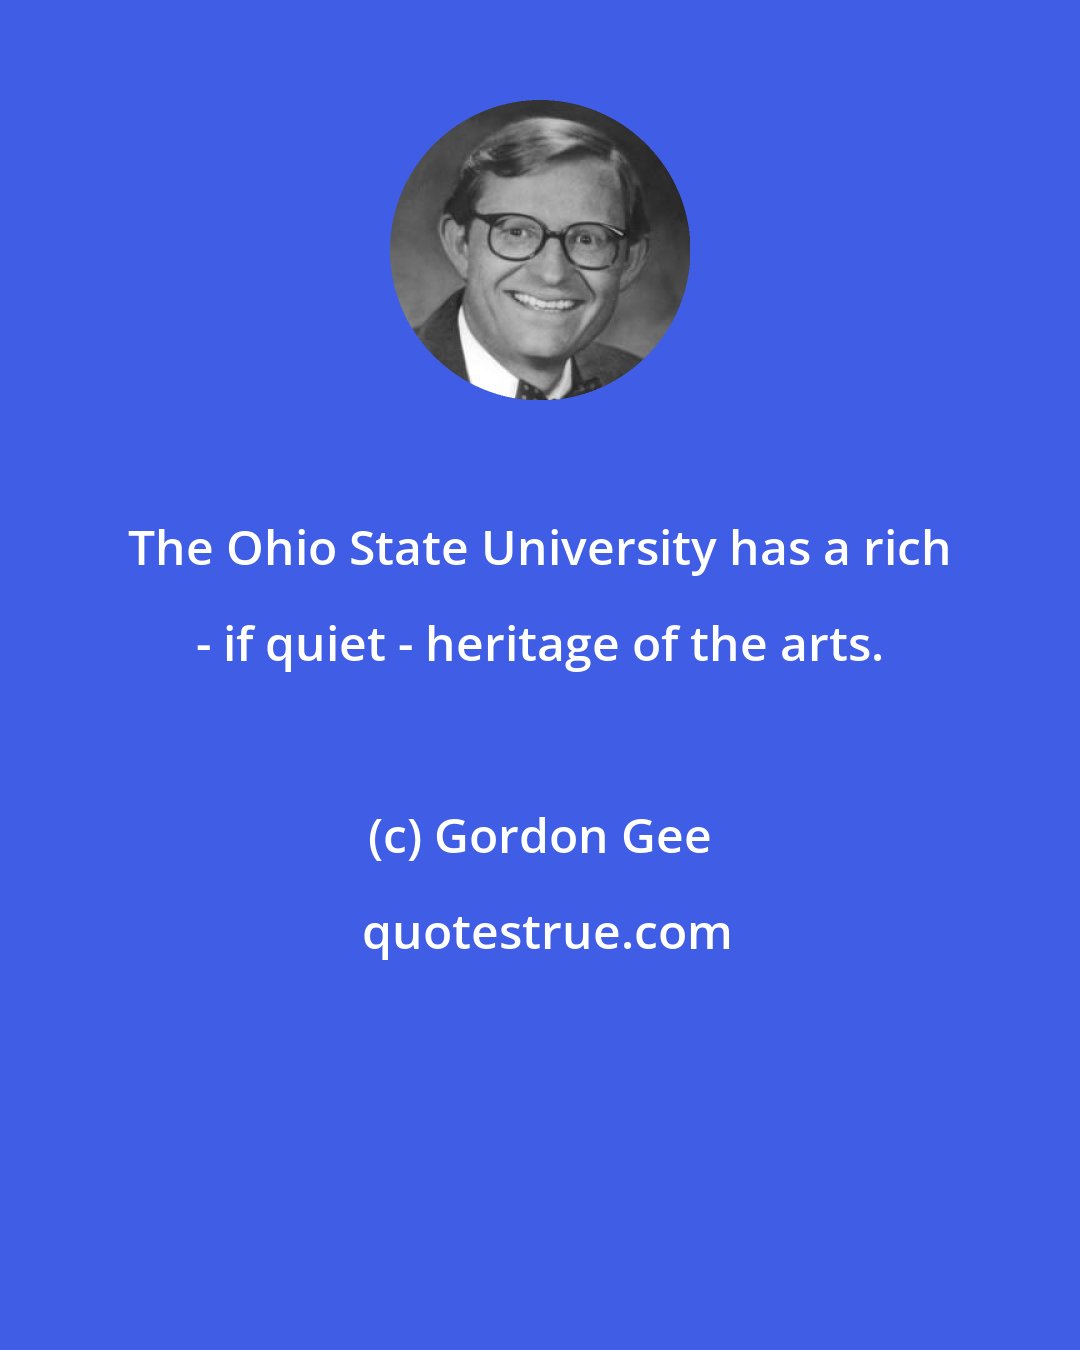 Gordon Gee: The Ohio State University has a rich - if quiet - heritage of the arts.